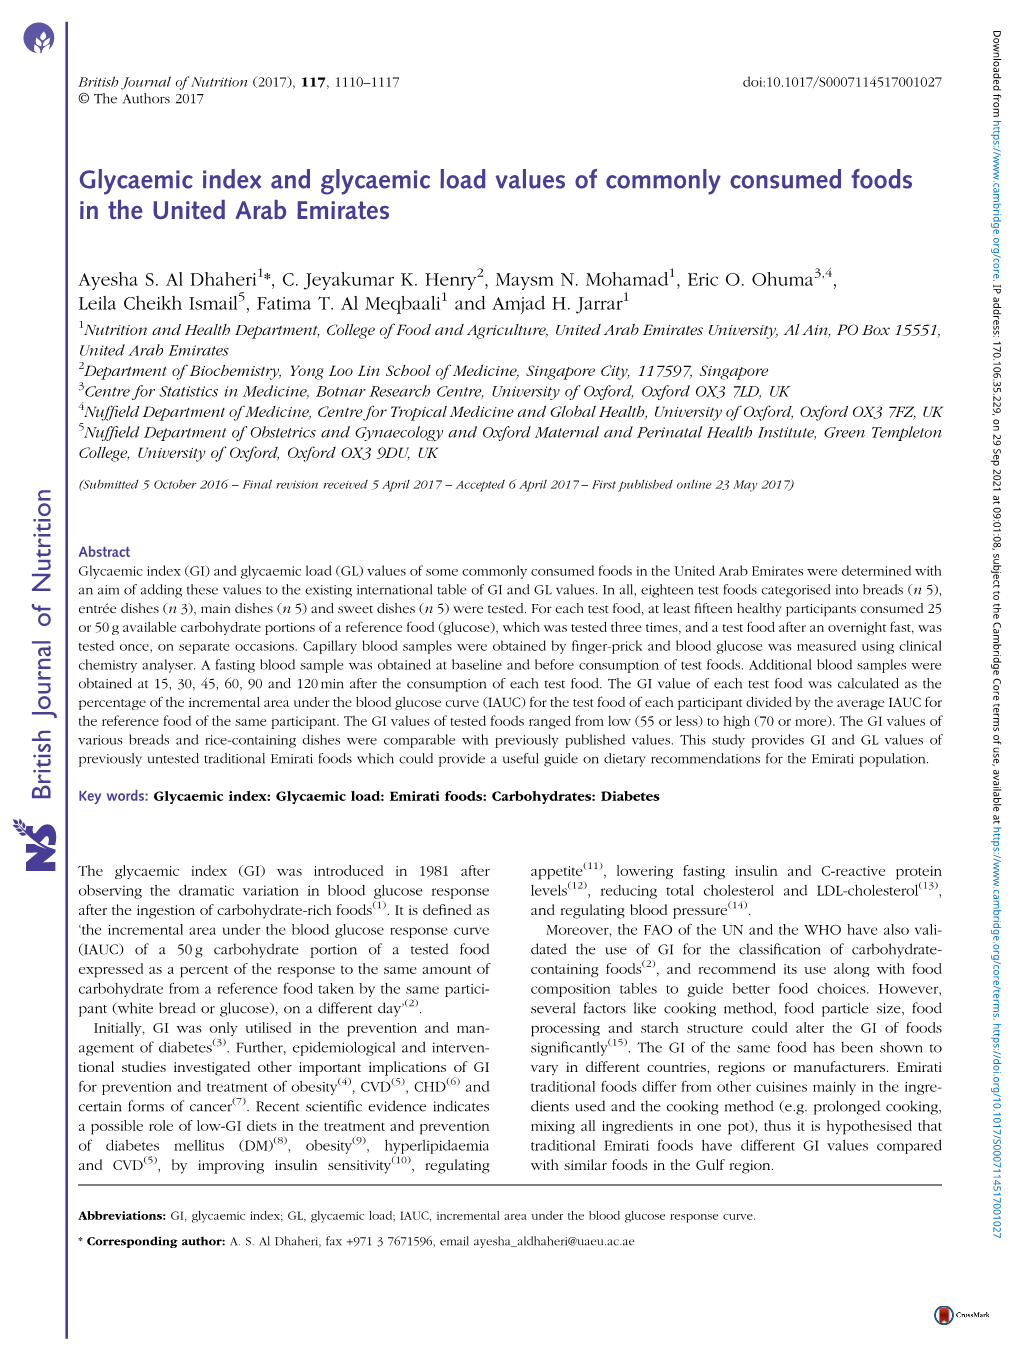 Glycaemic Index and Glycaemic Load Values of Commonly Consumed Foods in the United Arab Emirates